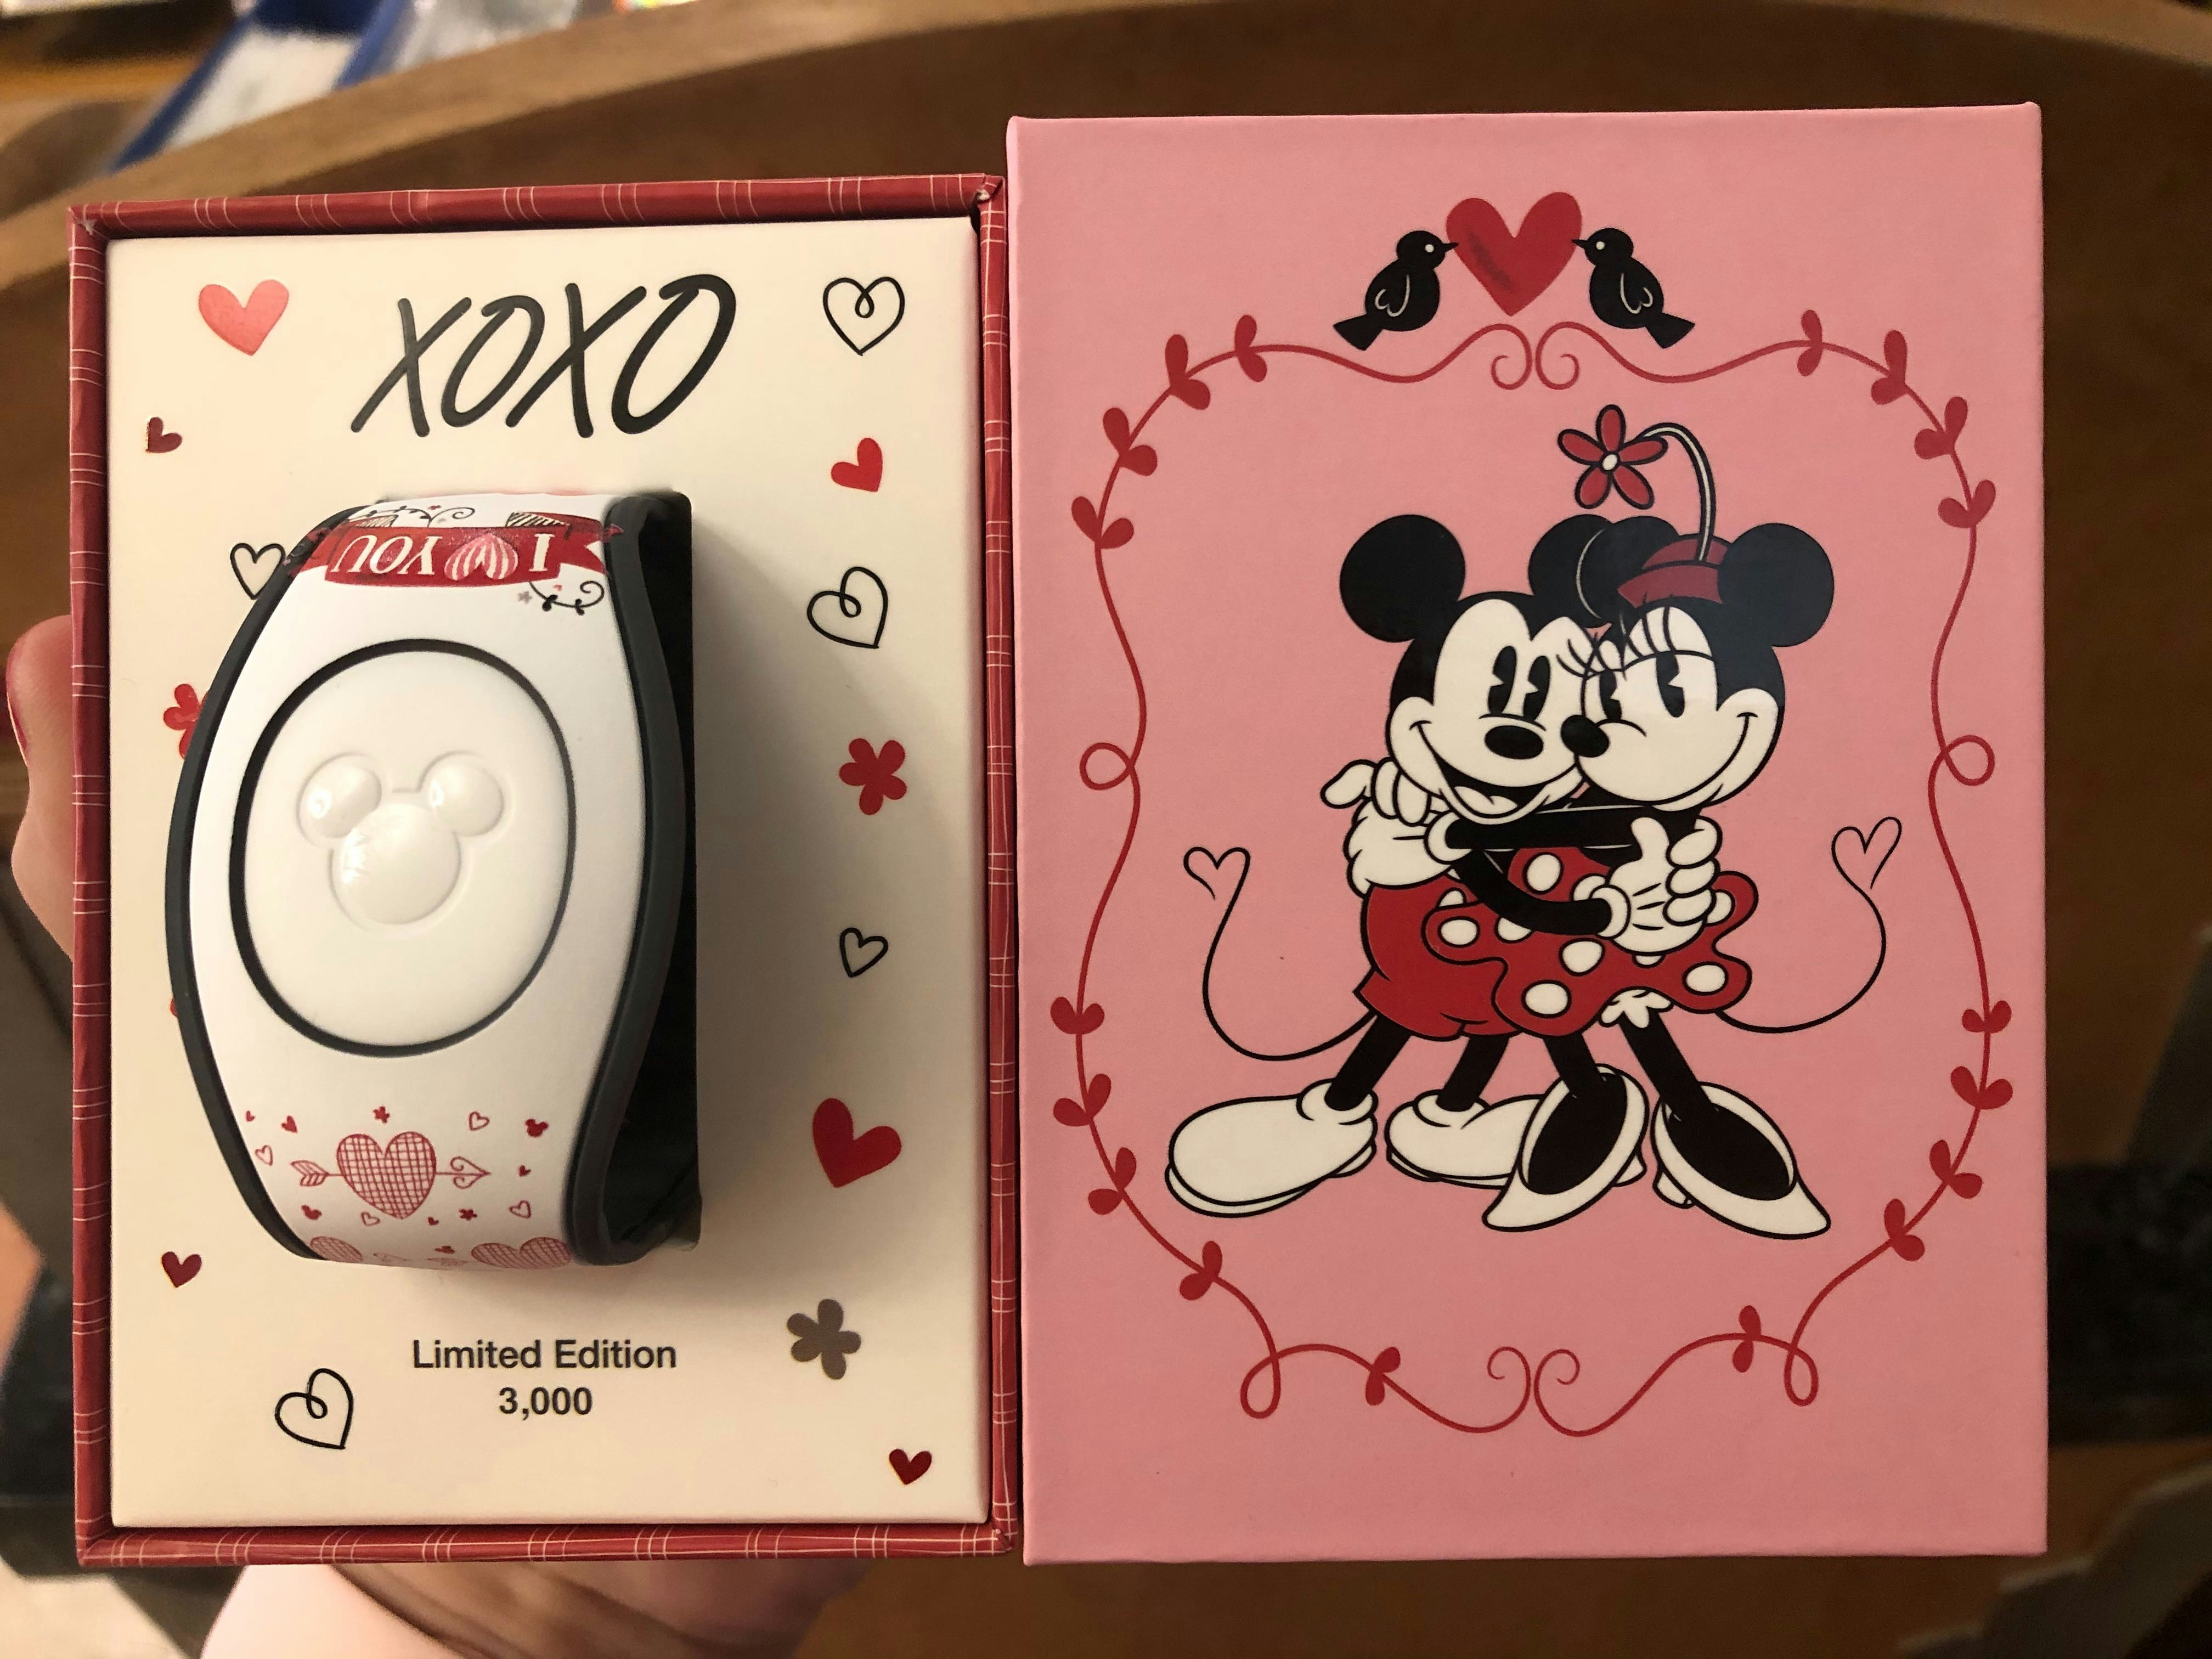 valentines day limited edition magicband 2020 2.jpg?auto=compress%2Cformat&ixlib=php 1.2